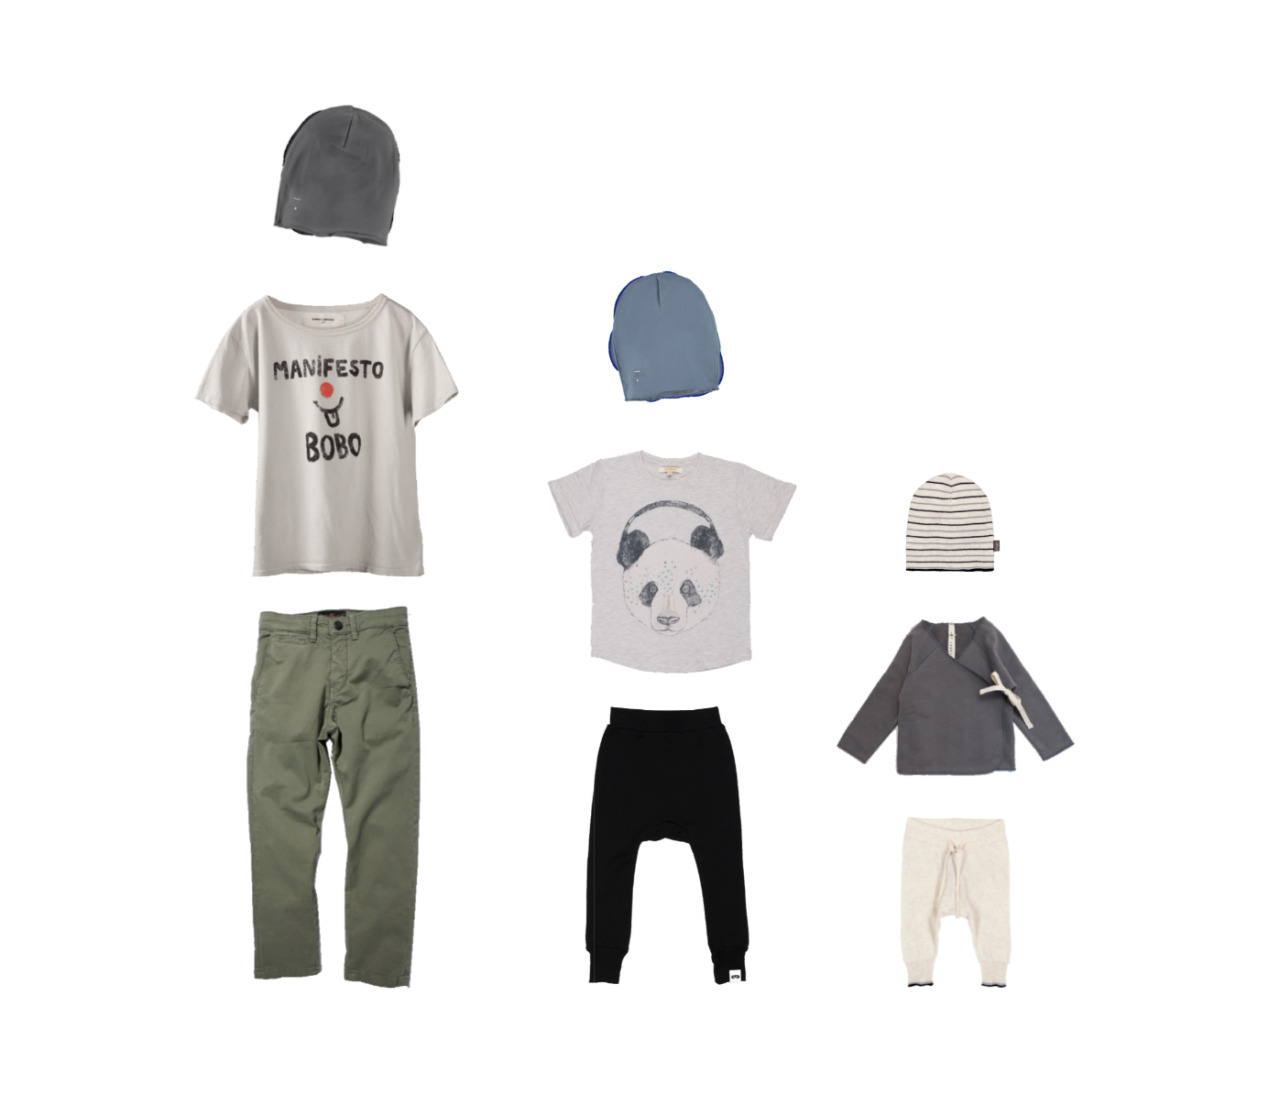 I scrolled trough one of my favorite stores and gathered spring outfits for my sons. 
Big boy outfit - Soft grey beanie by Gray Label // T-shirt by Bobo Choses // Green chinos by Finger in the nose.
Small boy outfit - Faded blue beanie by Gray Label // Panda tee by Soft Gallery // Pants by Beau Loves
Baby outfit - Striped beanie by Kidscase // Crossover top by Gray Label // Knit pants by Kidscase. 
All these products can be found at Orange Mayonnaise. 